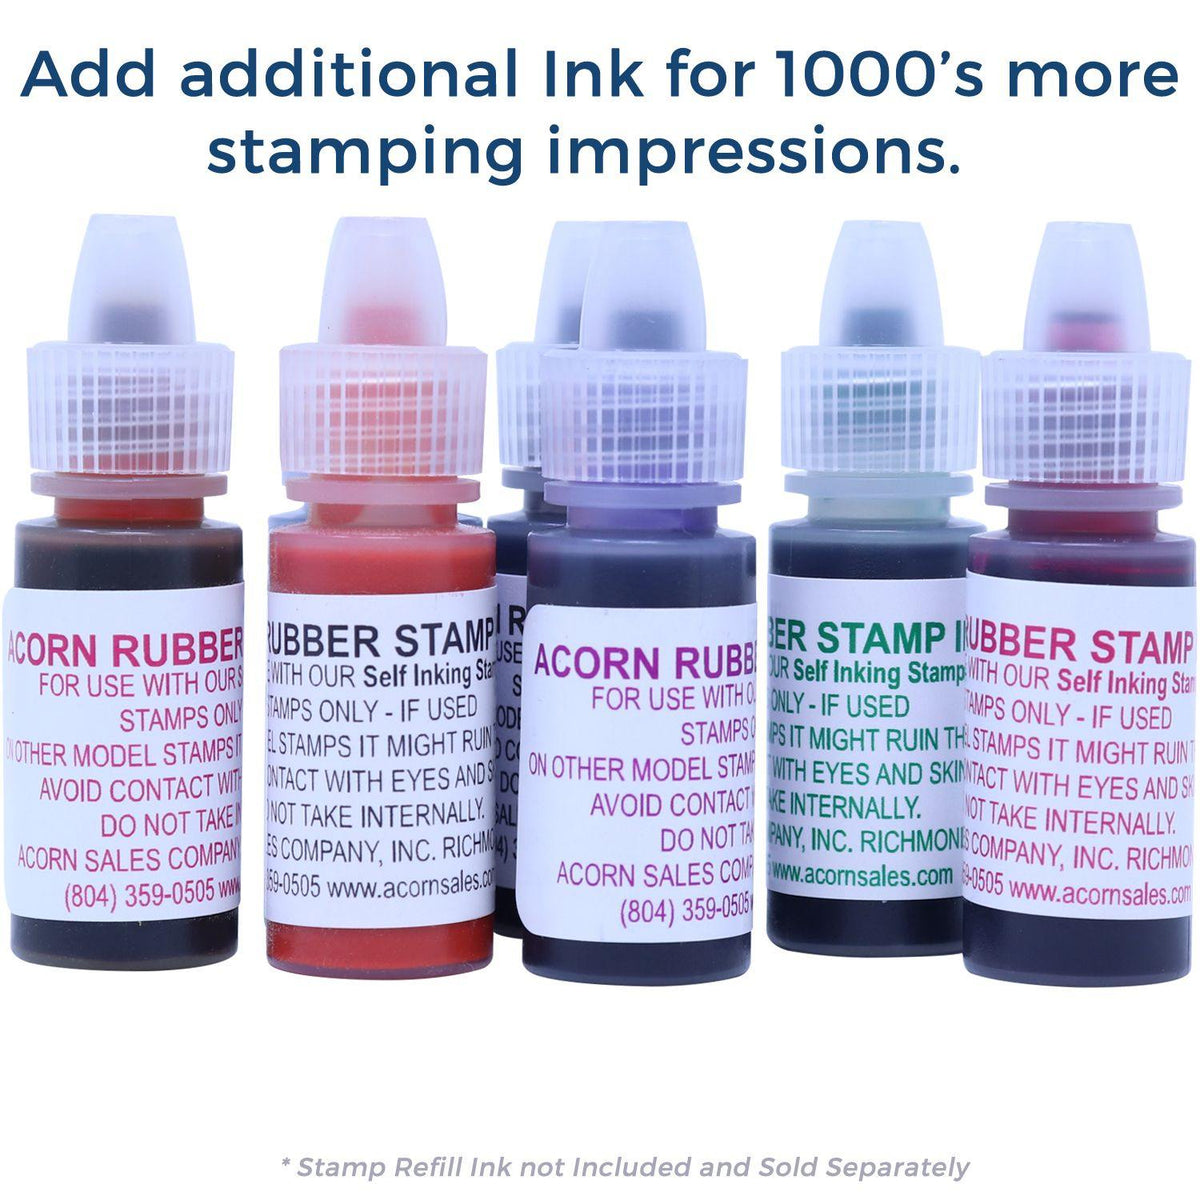 Refill Inks for Large Pre-Inked Please Forward Insurance Form Stamp Available